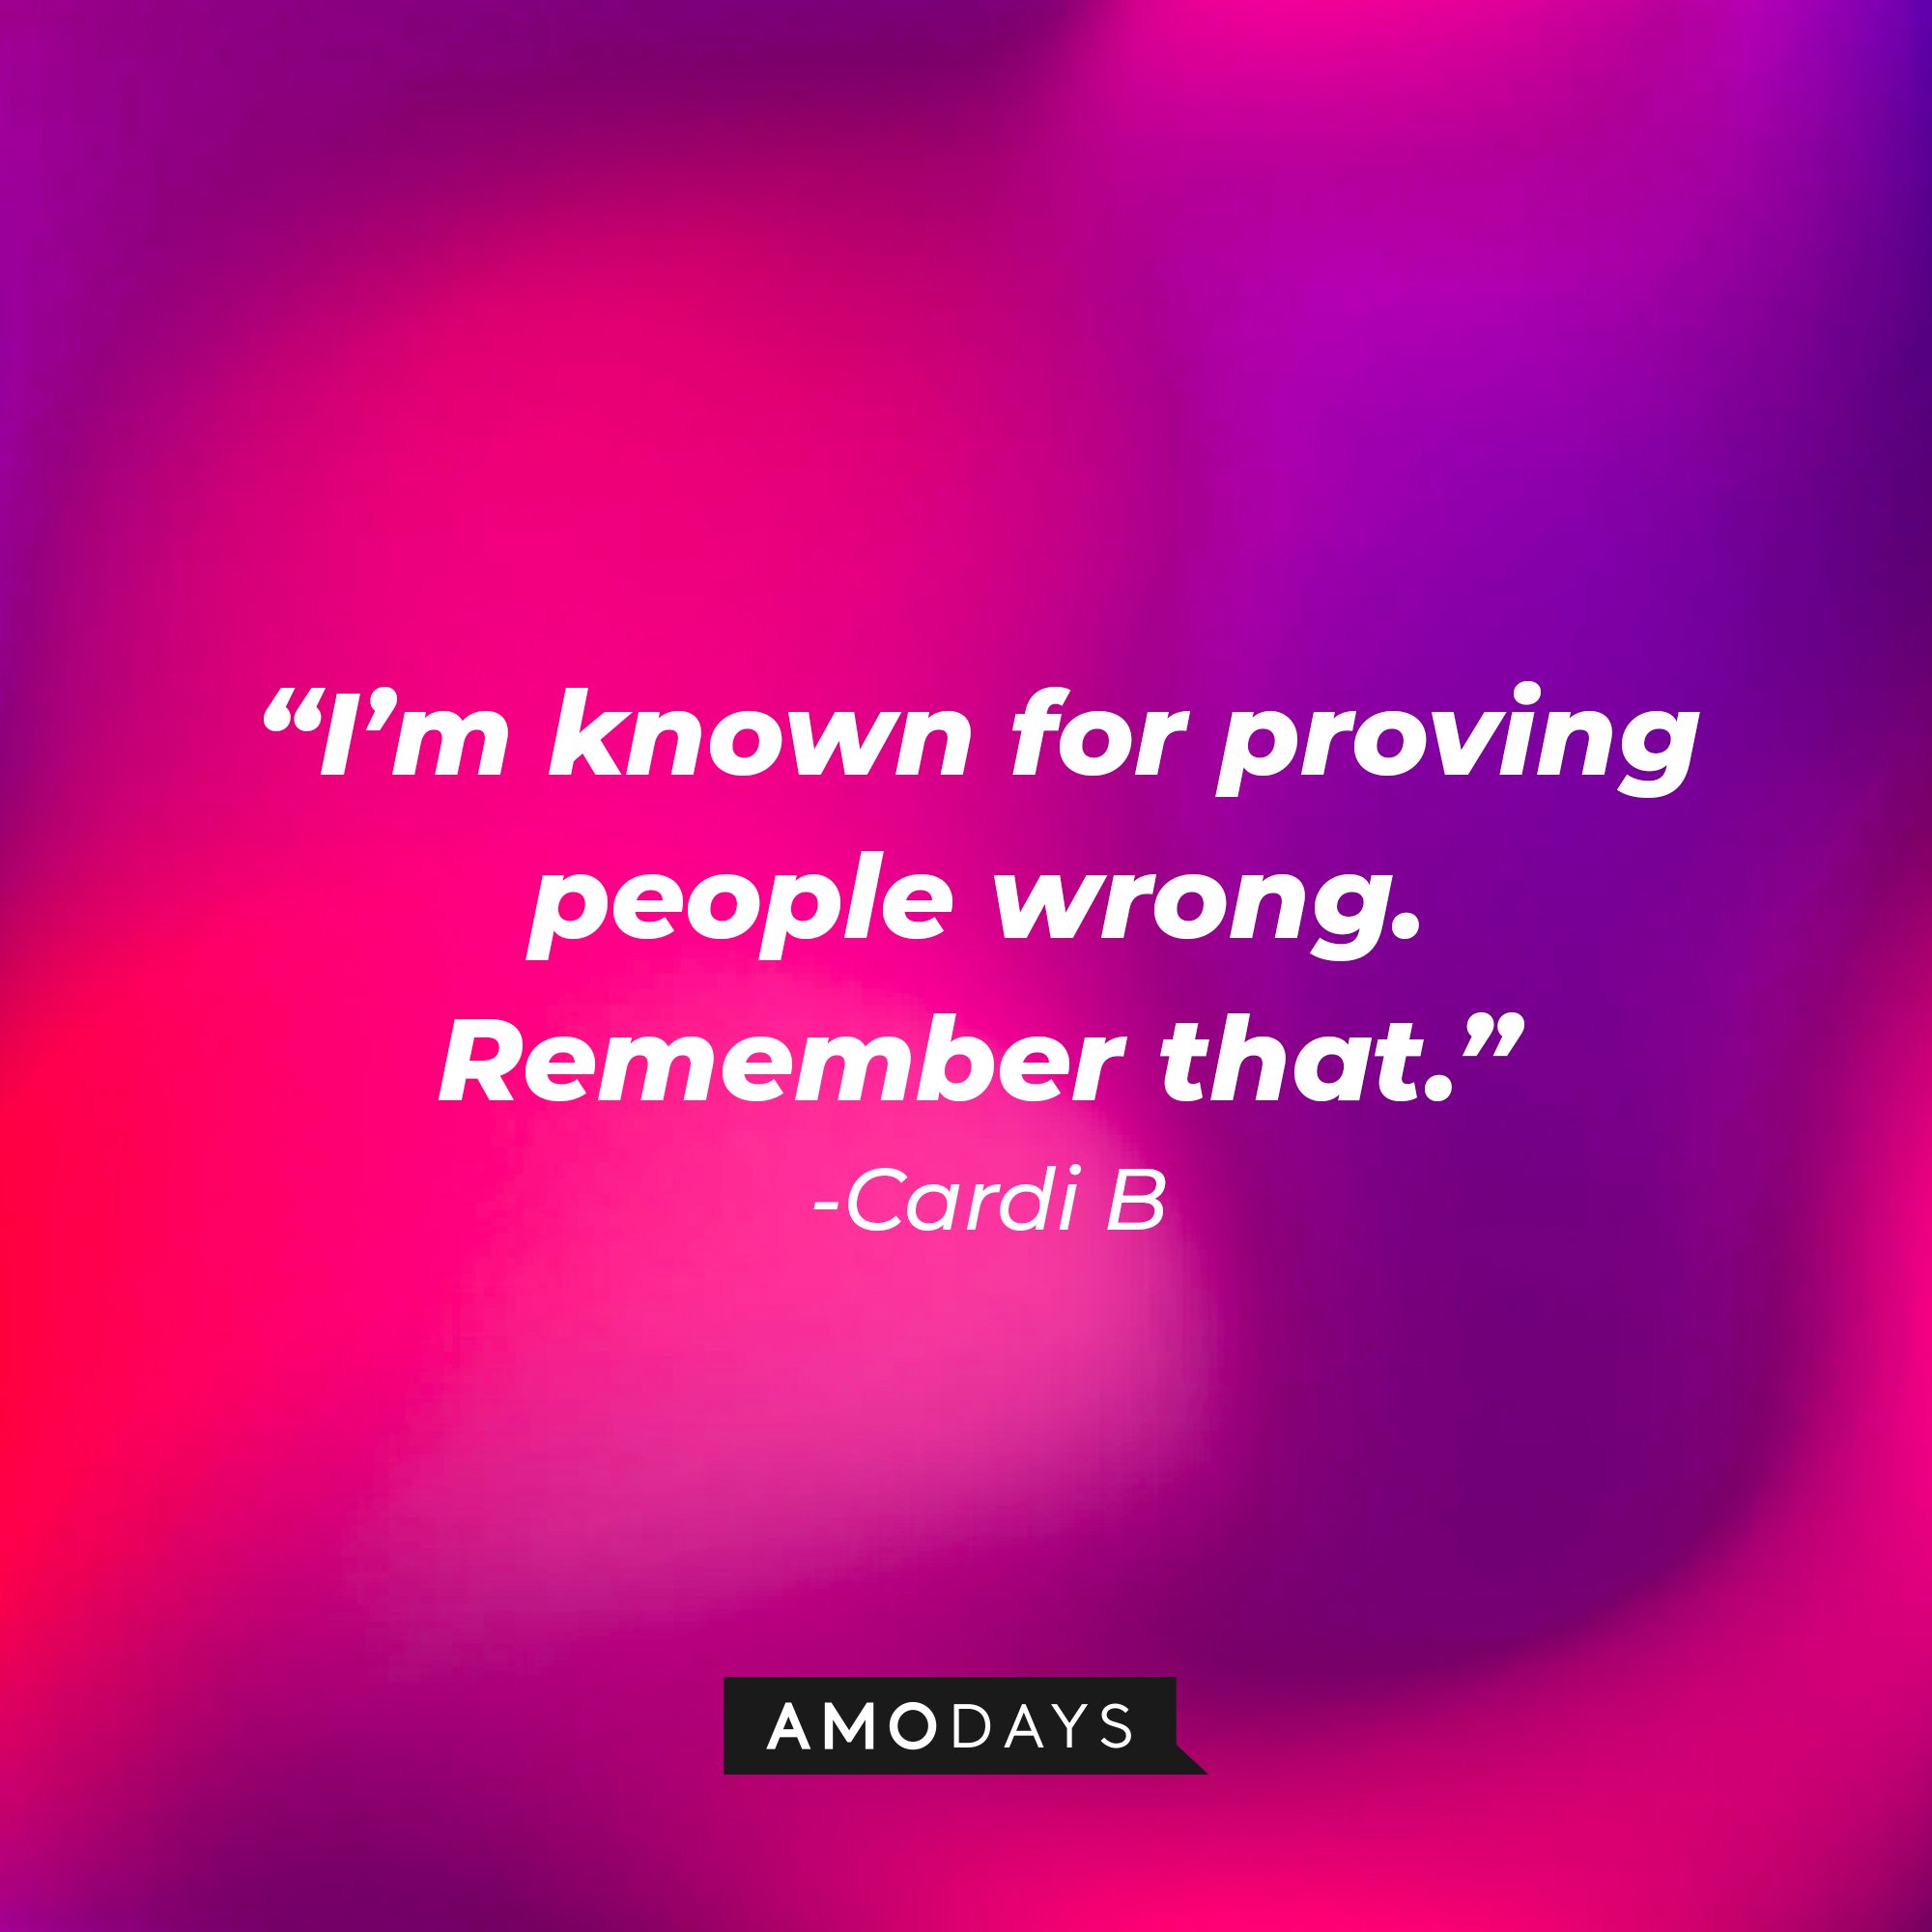 Cardi B's quotes: "I'm known for proving people wrong. Remember that." | Image: AmoDays